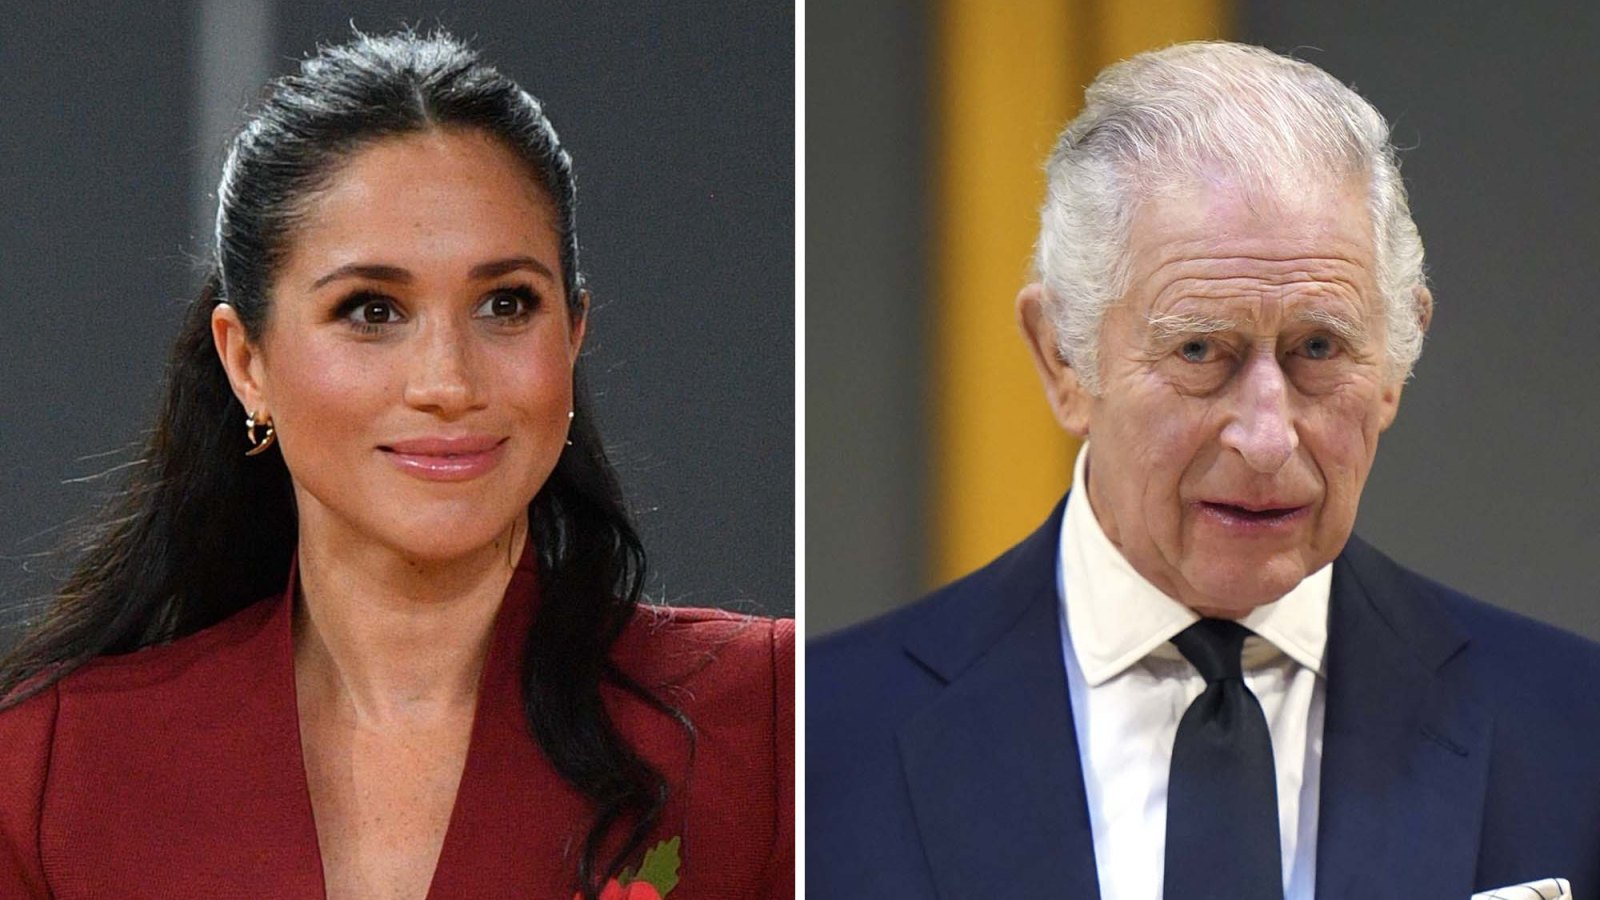 Meghan Markle Wore Little Makeup to Impress King Charles